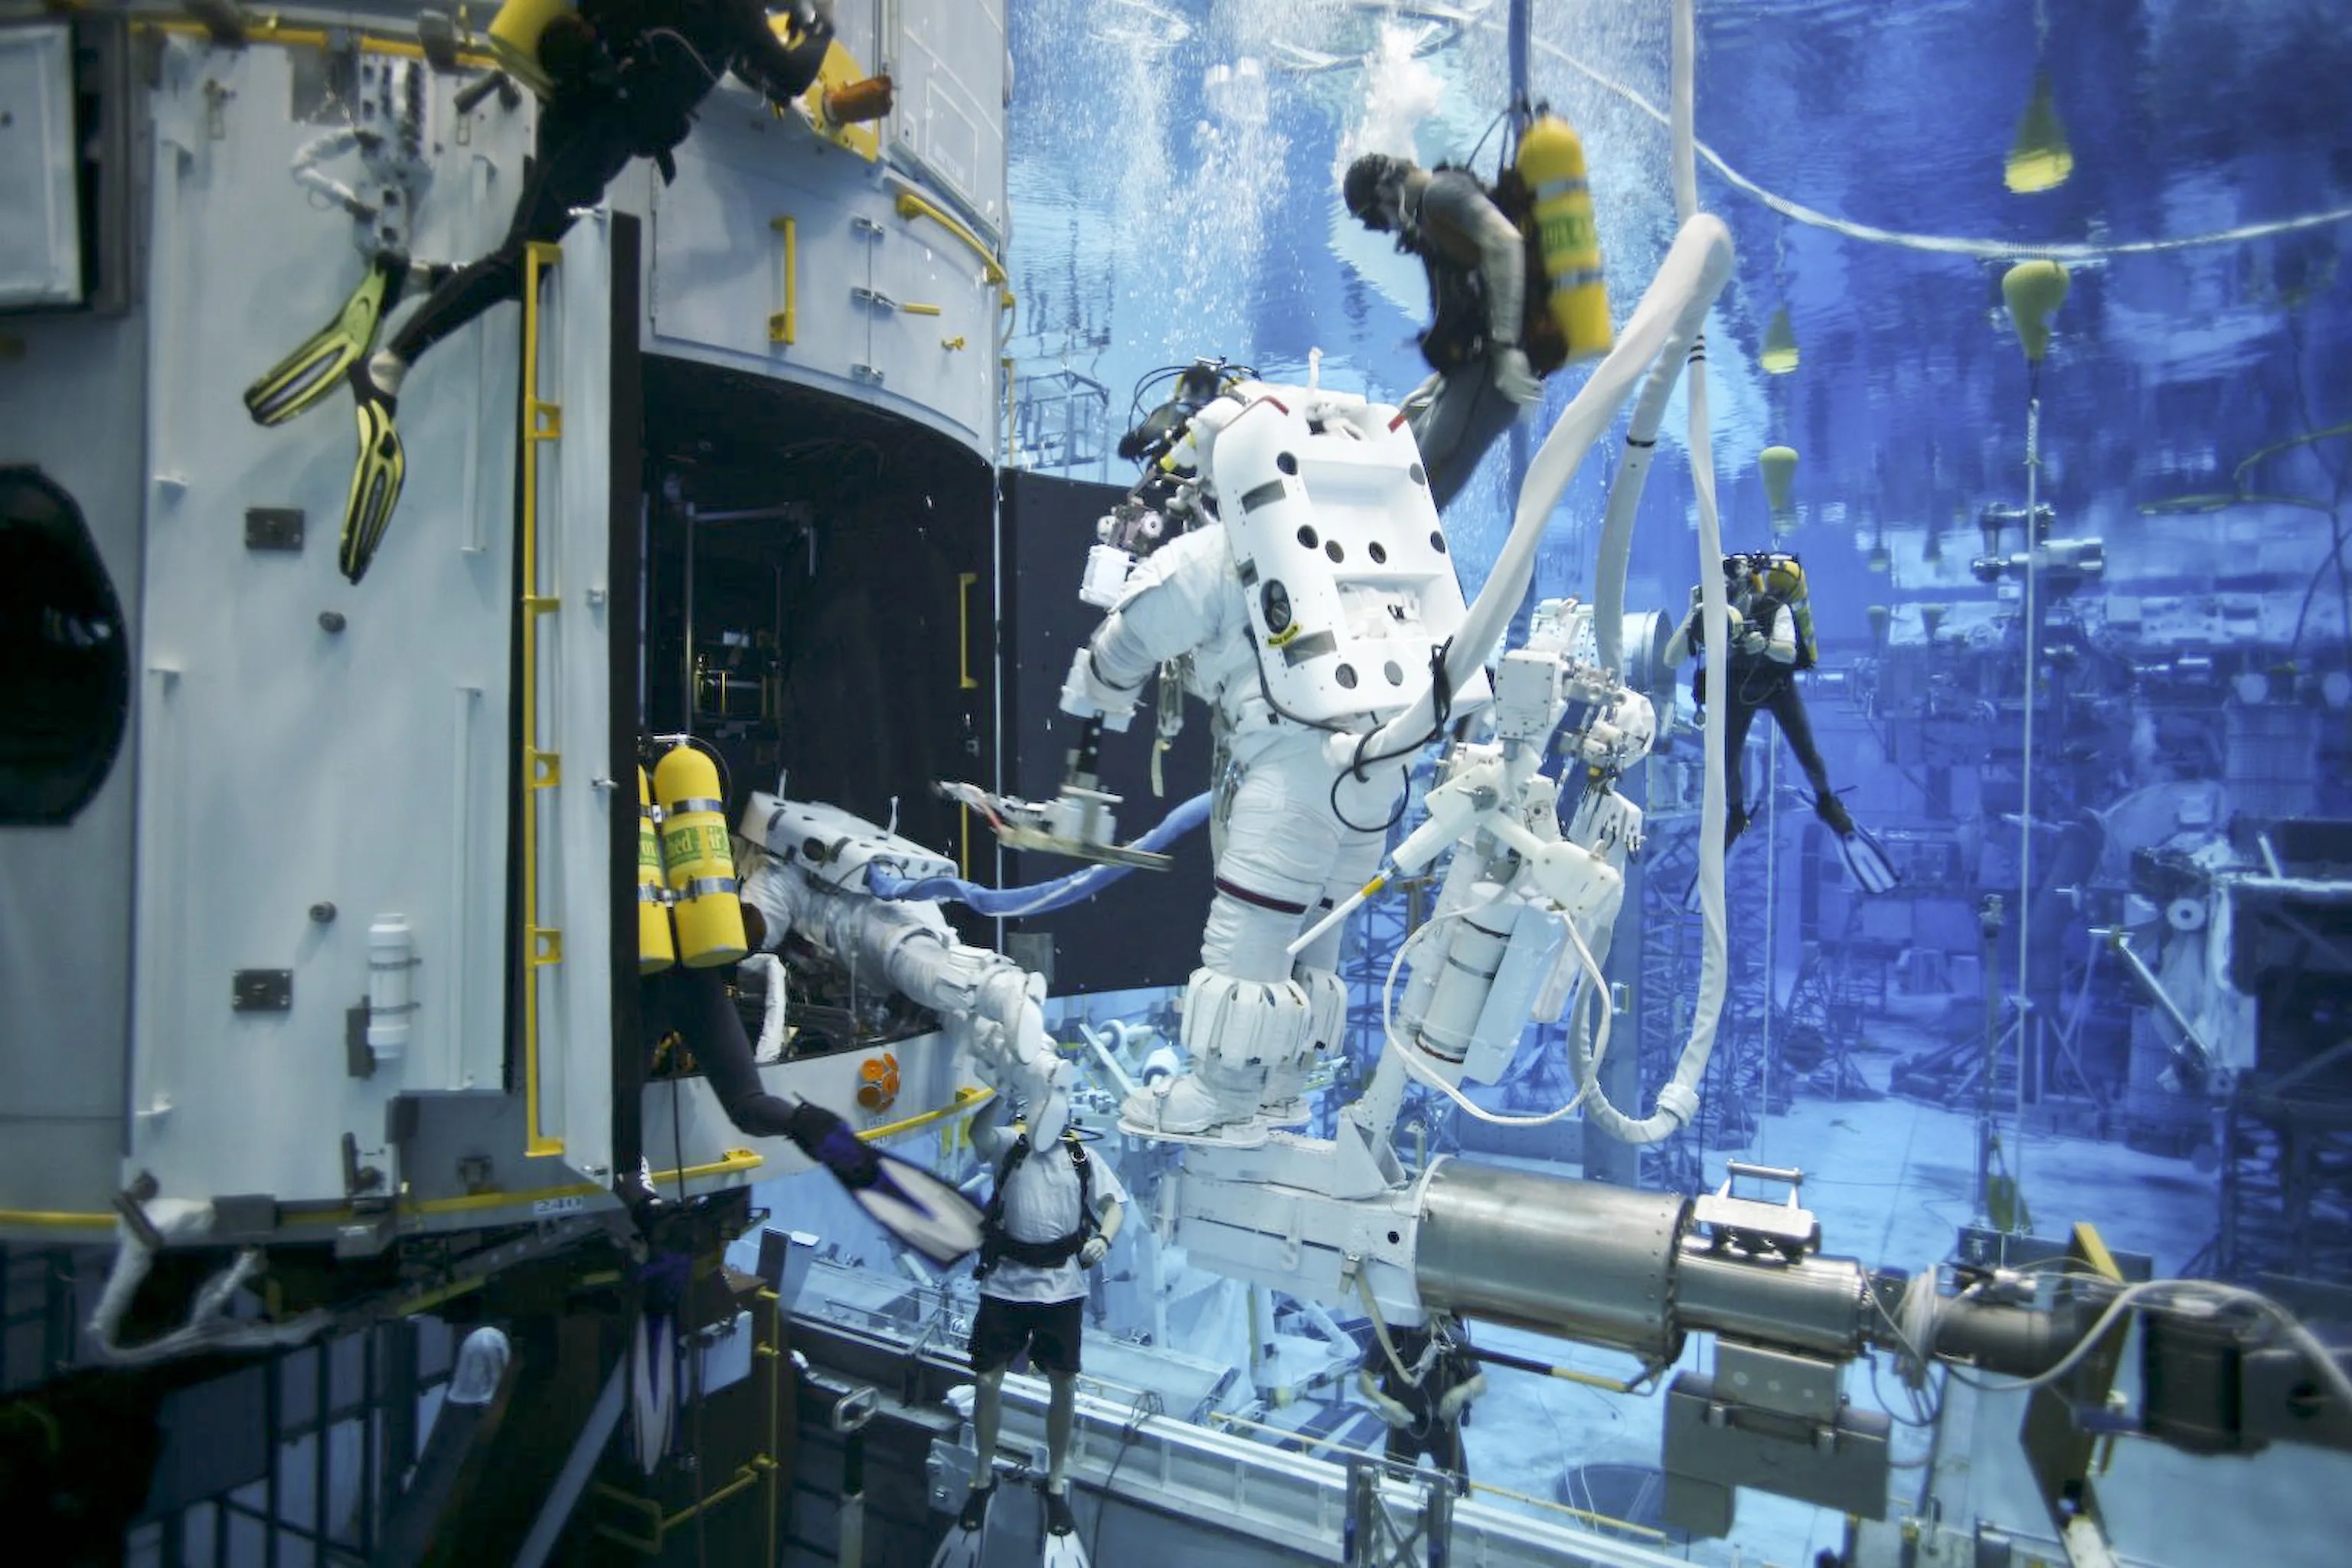 Astronauts practice in the NBL under the watchful eye of NASA engineers and safety divers.